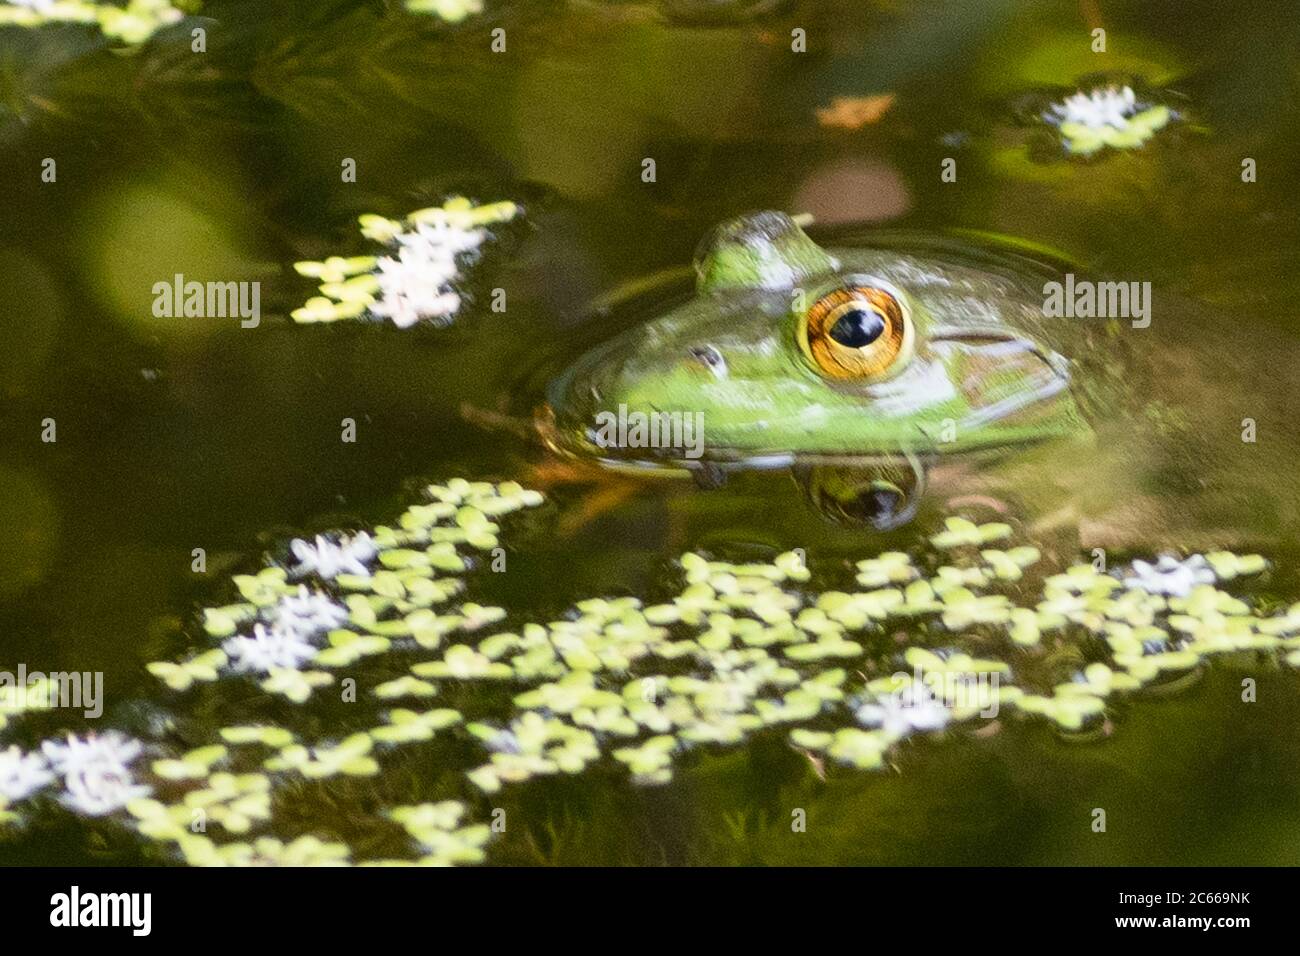 Frog eye reflects as the amphibian  patiently waits  for dinner to come within striking range. Stock Photo